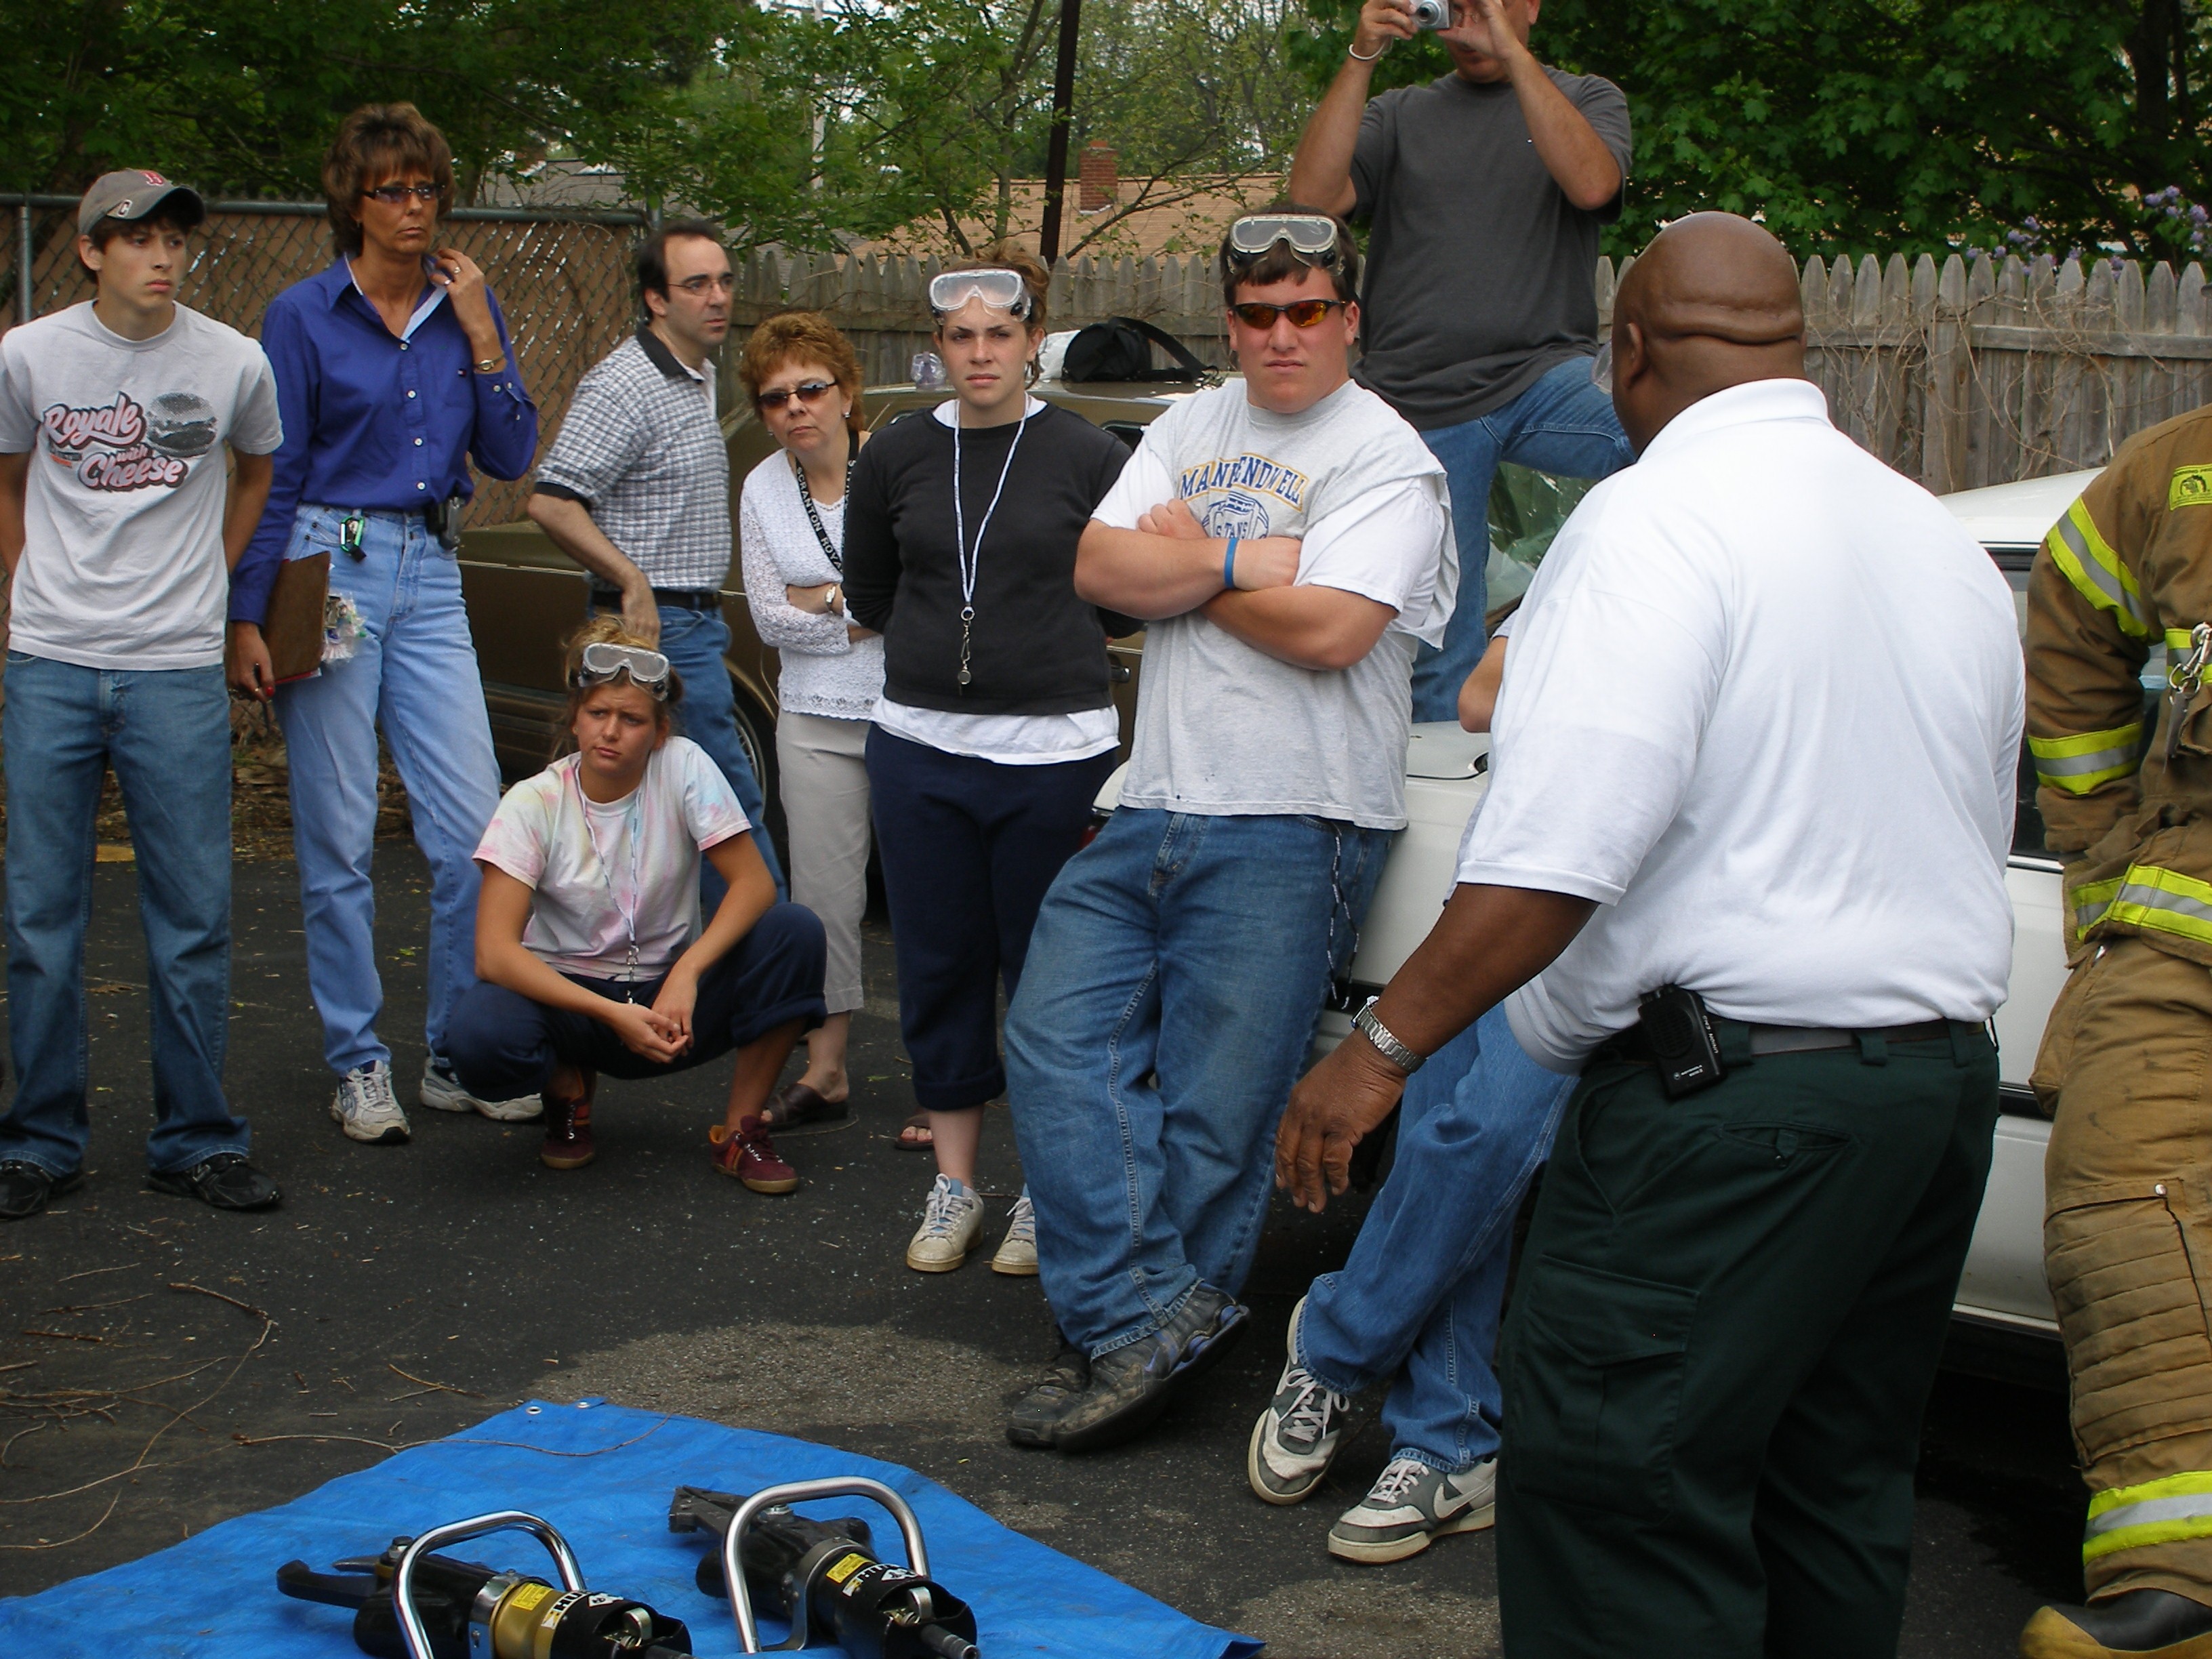 05-23-06  Other -  SADD Drill